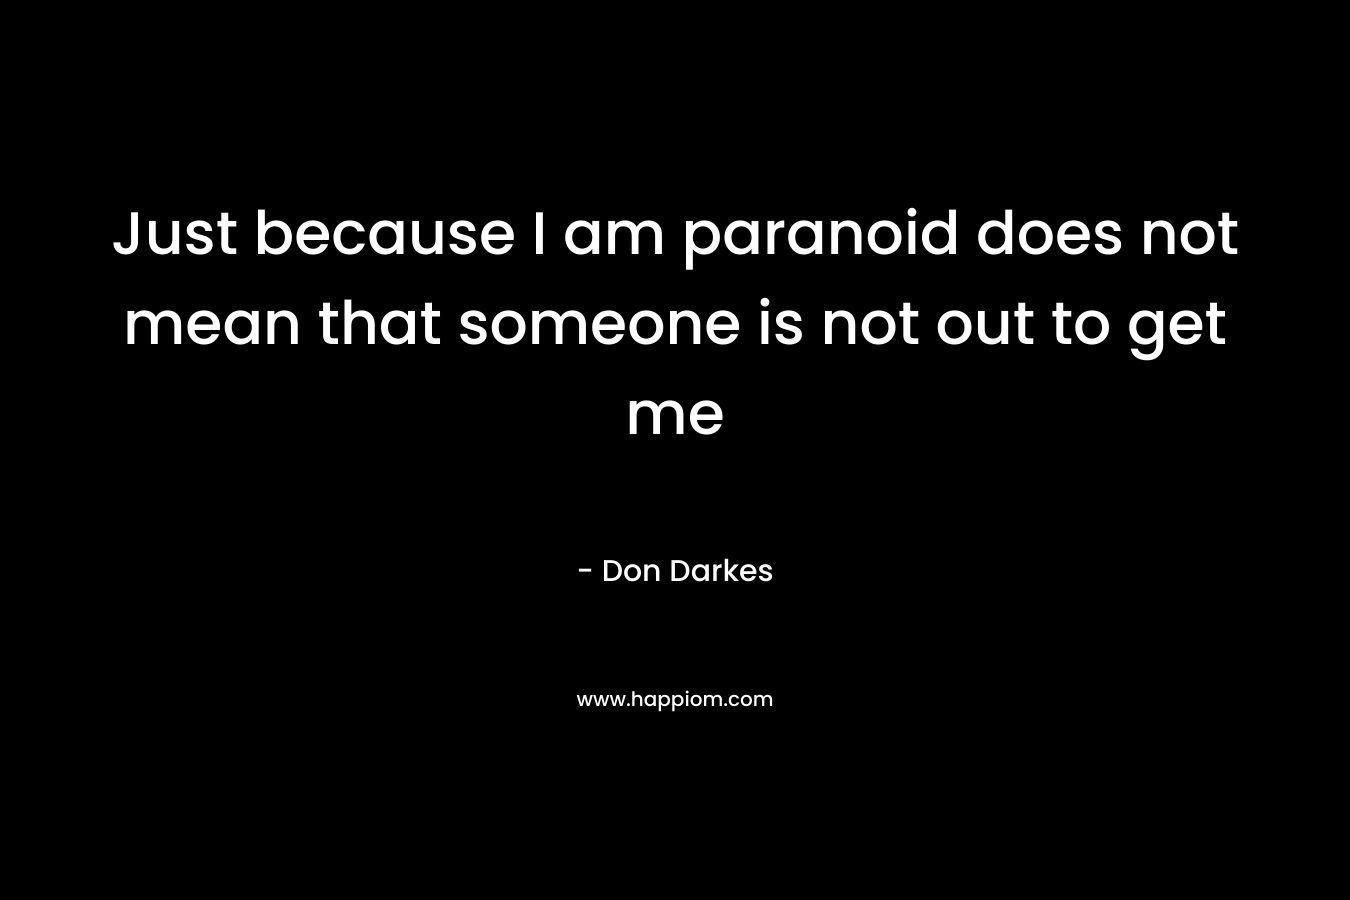 Just because I am paranoid does not mean that someone is not out to get me – Don Darkes